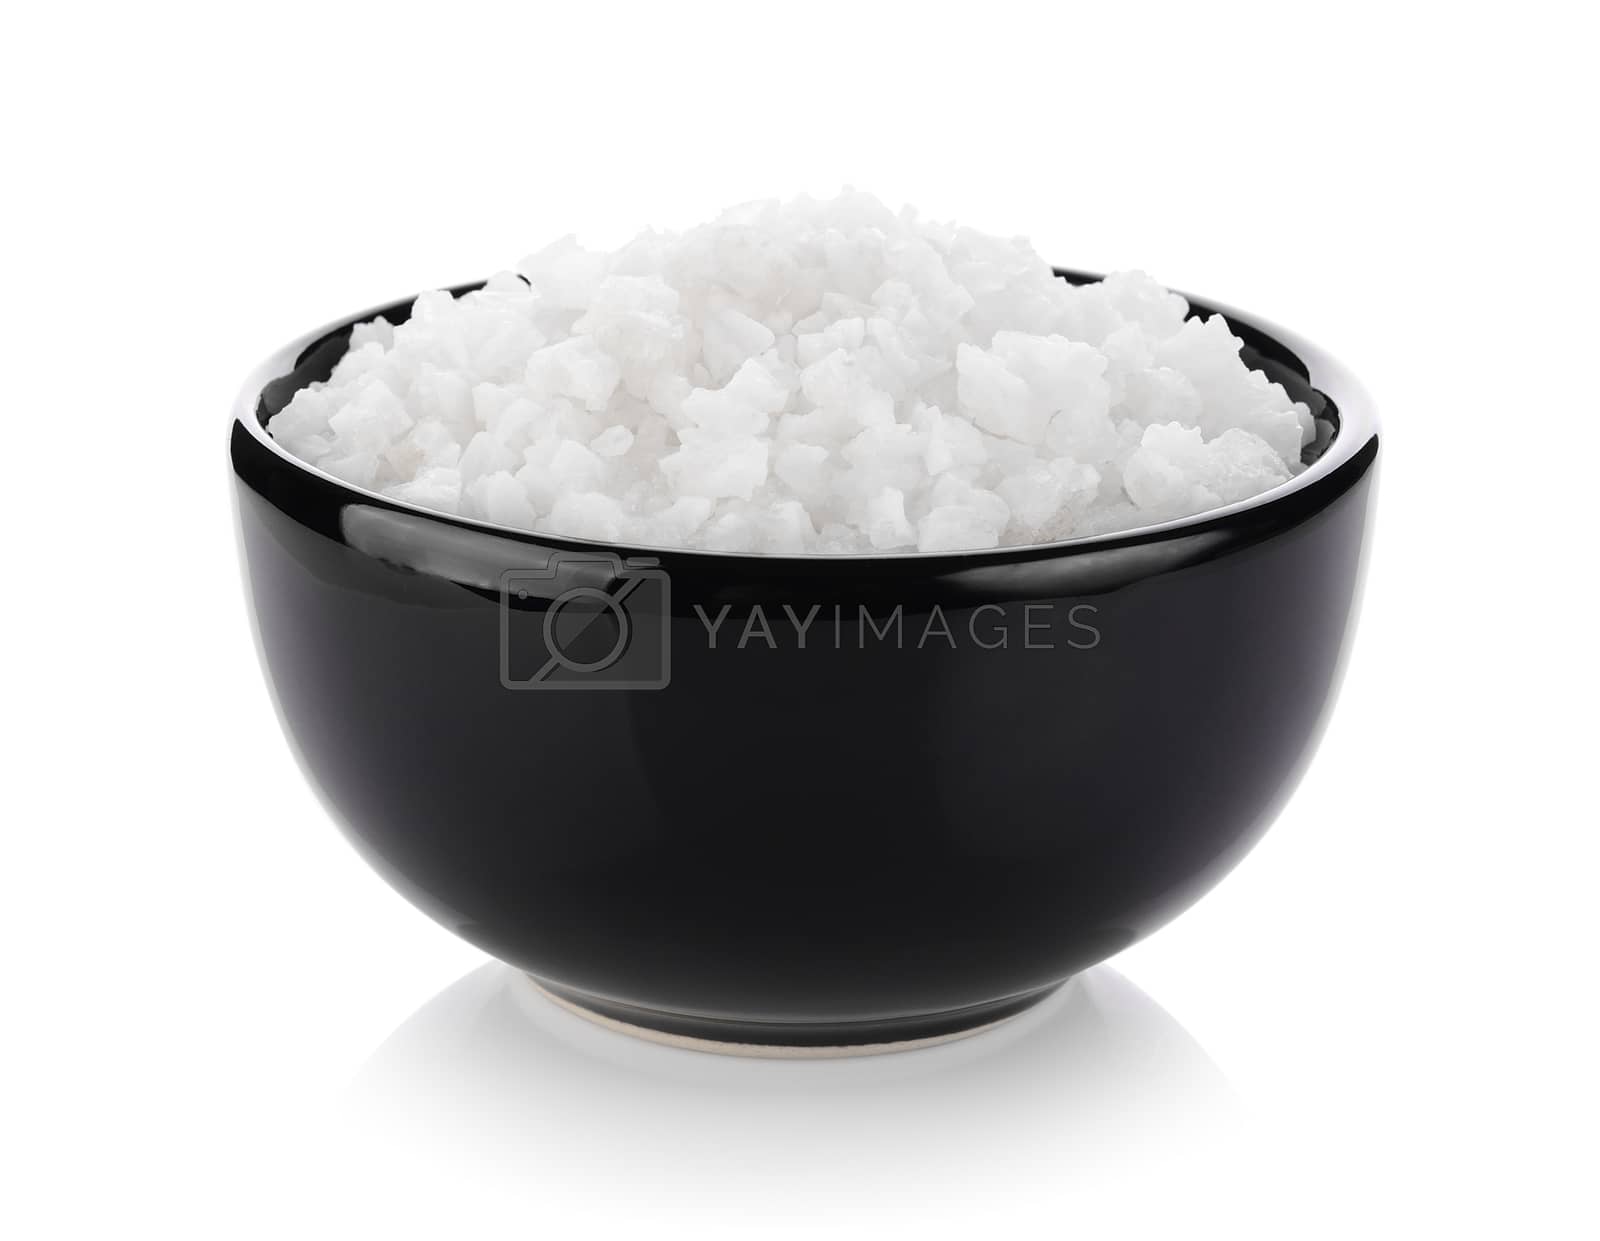 Royalty free image of salt in a bowl on white background by sommai